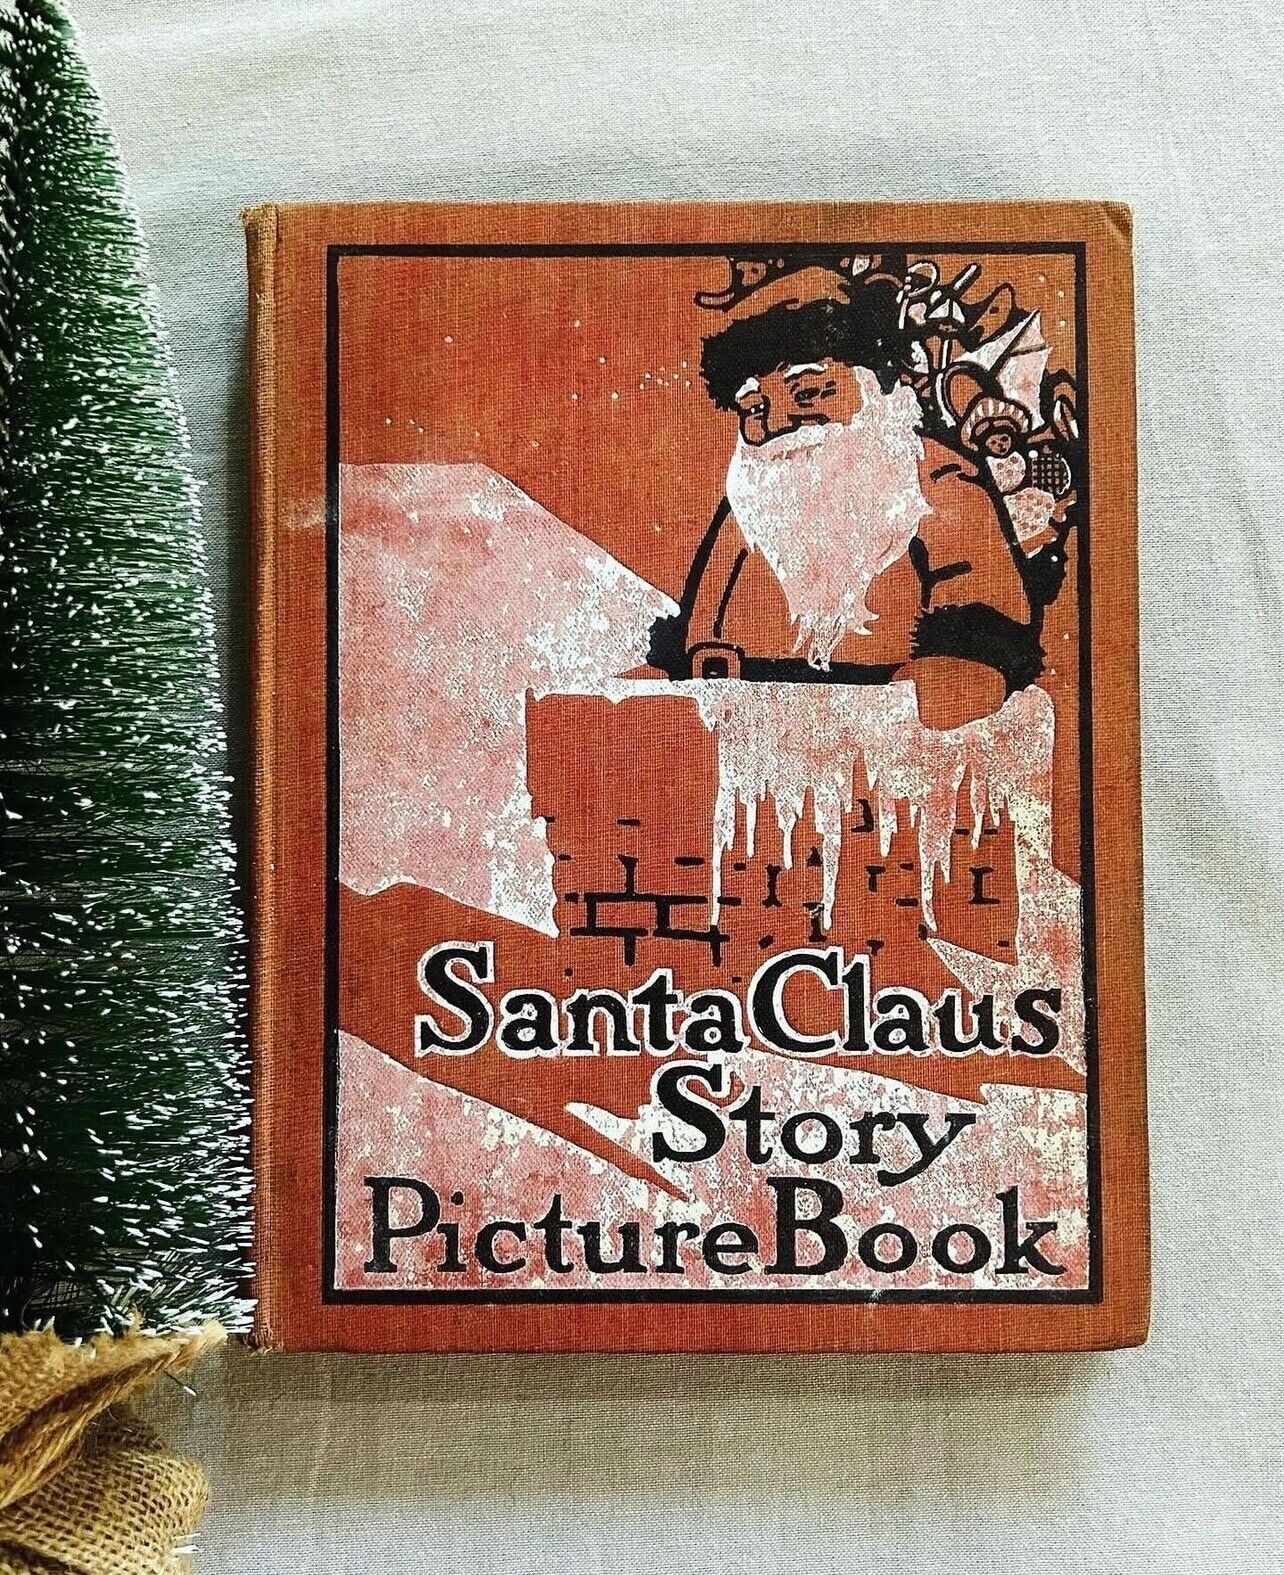 Santa Claus Story Picture Book~ M.A. Donohue Antiquarian Rare Find